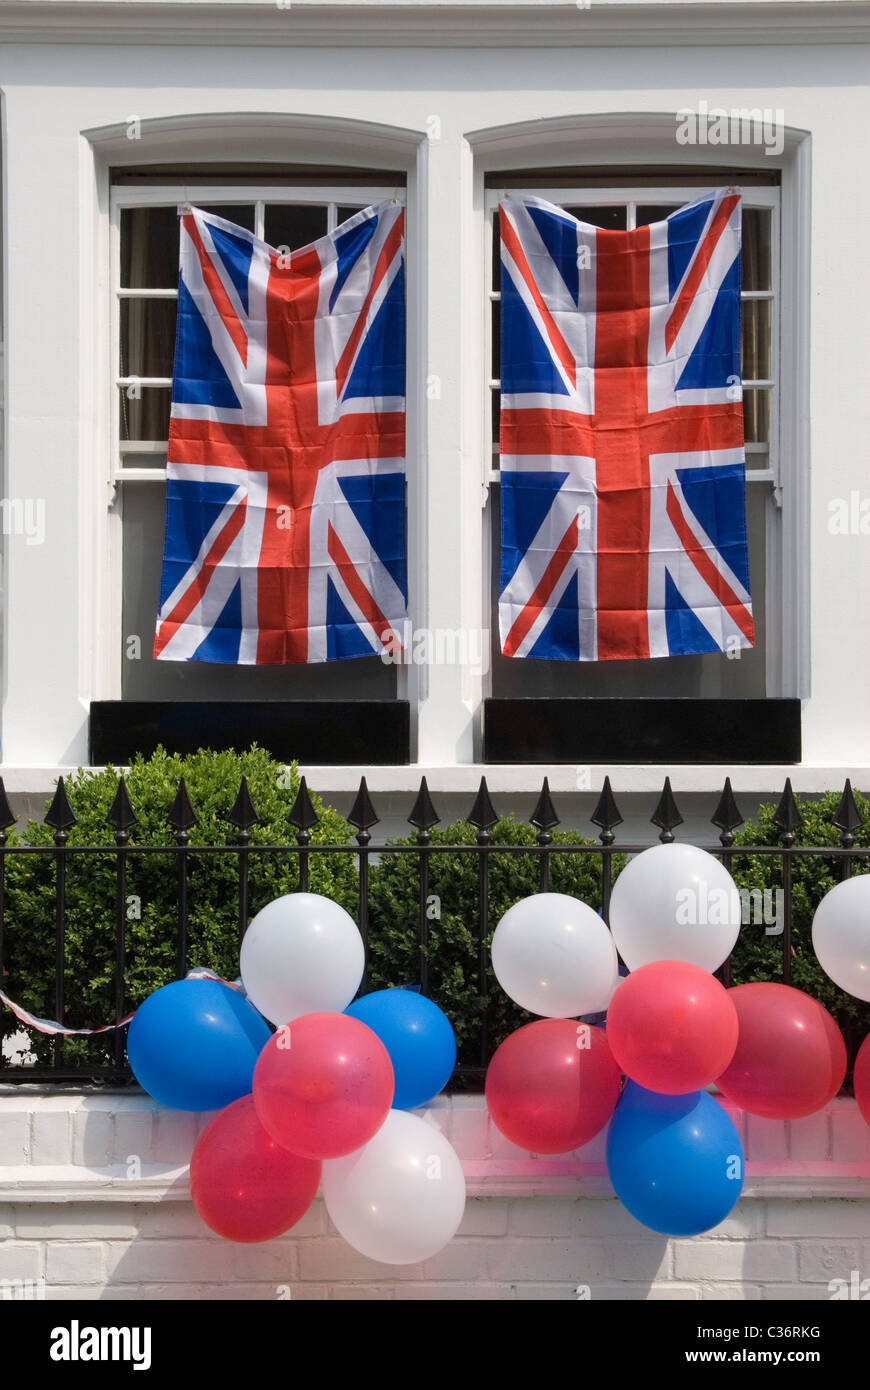 Royal Wedding Street Party. Bunting exterior Chelsea London April 29 2011 2010s UK Prince William and Kate Middleton. Red white and blue balloons and Union Jack flags decorate the exterior outside of a house. HOMER SYKES Stock Photo